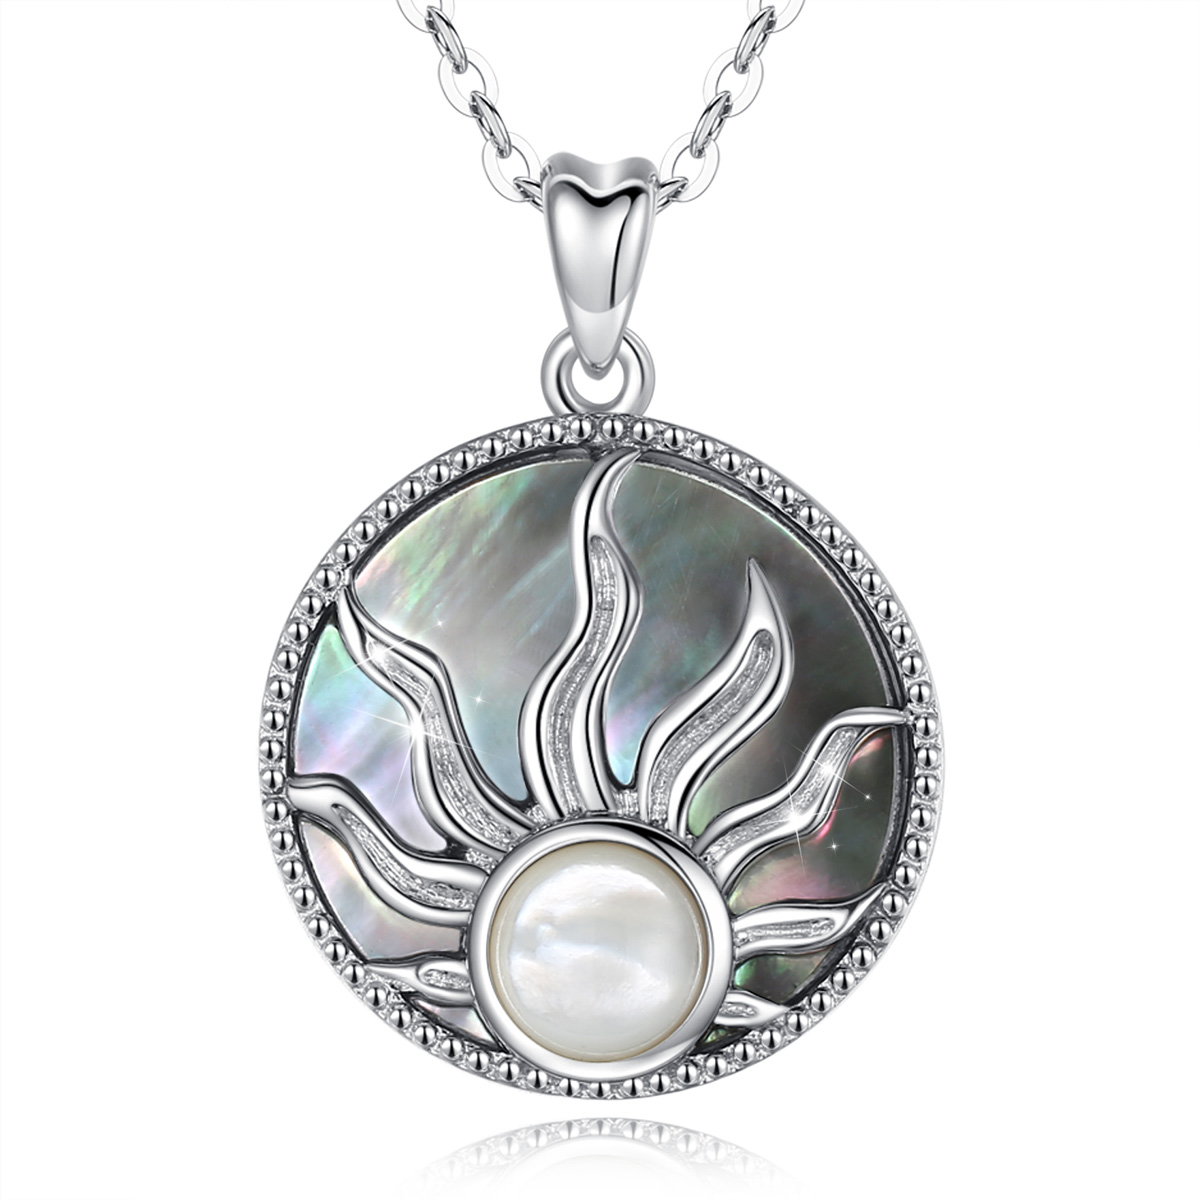 Merryshine Jewelry S925 Sterling Silver Vintage Oxidized Mother Of Pearl Shell Round Pendant Sunflower Necklace With Moonstone